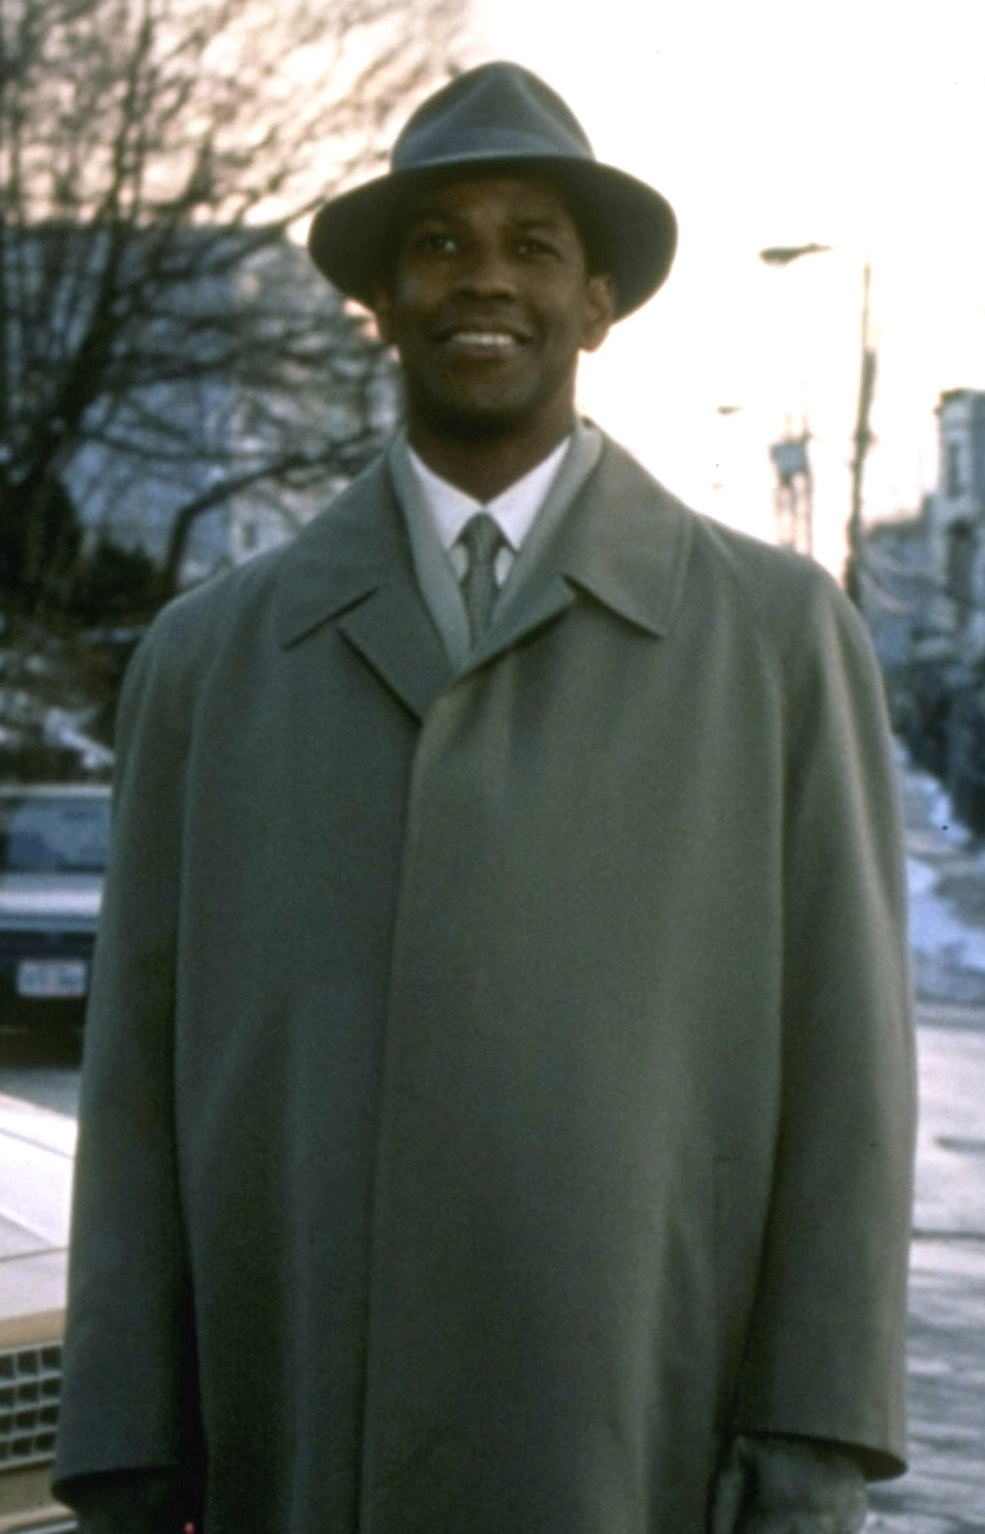 Washington standing happily in the cold, wearing a long coat and hat